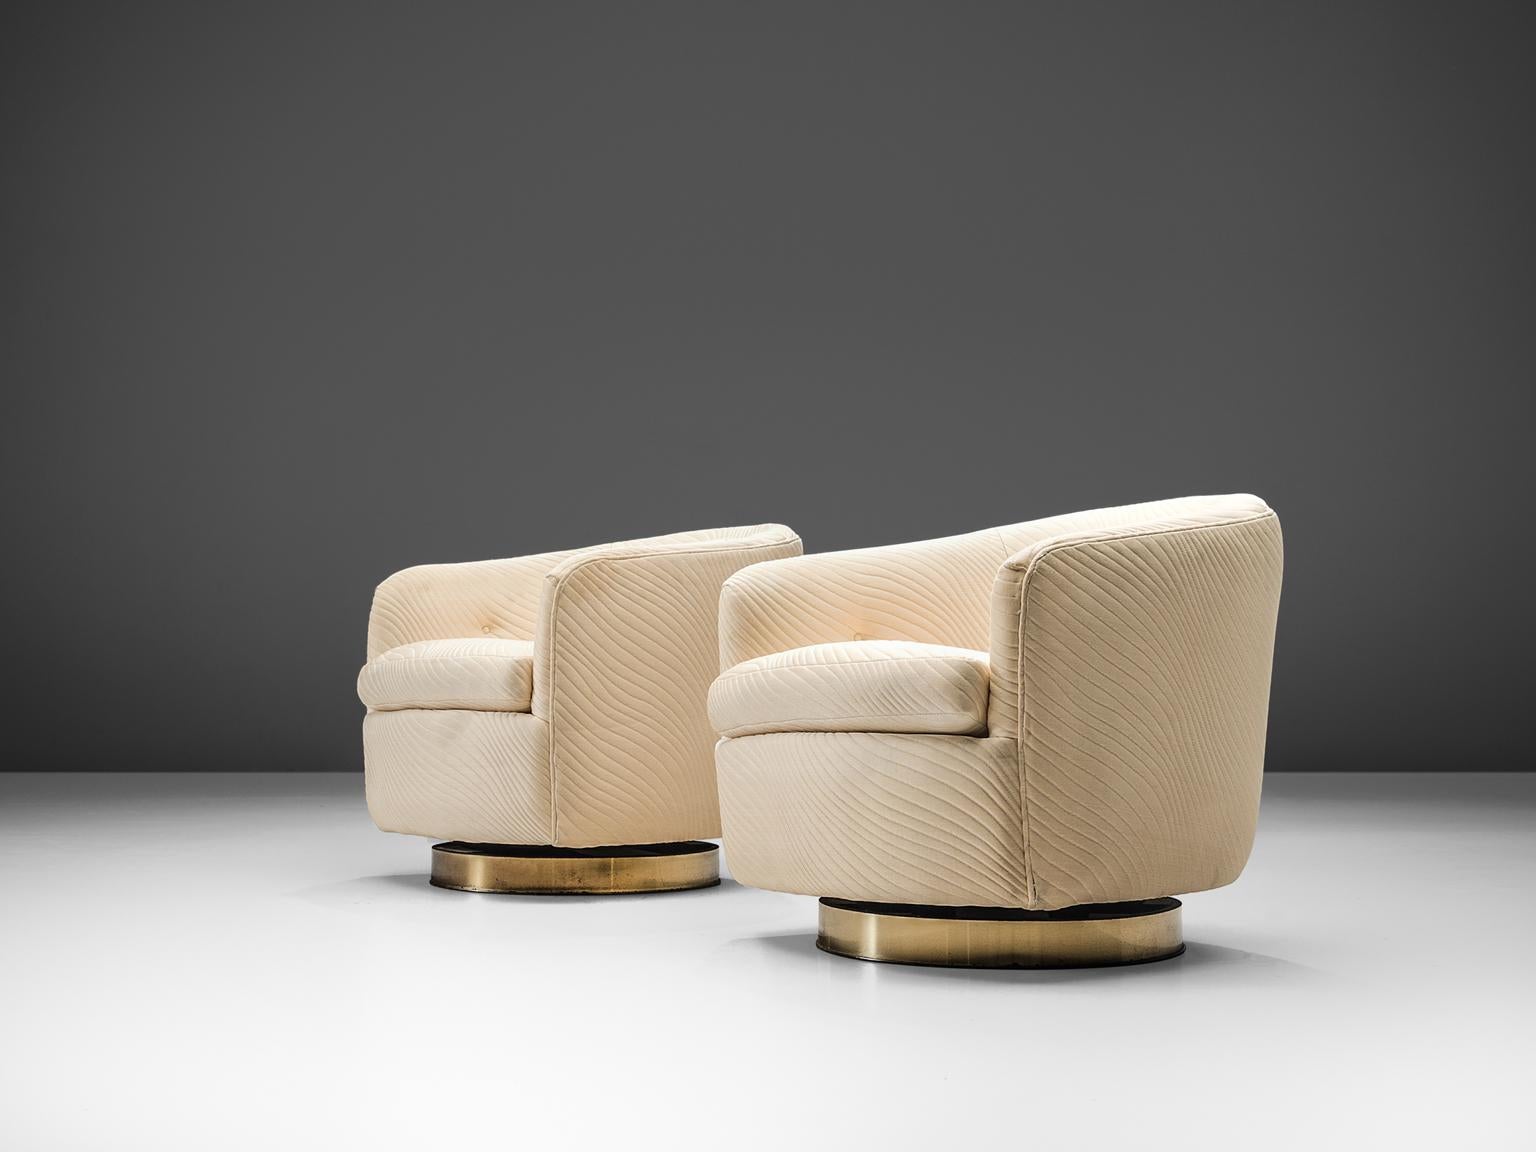 Milo Baughman for Thayer Coggin, set of two swivel chairs, in rippled fabric and brass, United States, 1960s. 

These lounge chairs which embrace the shape of the body, are very comfortable and easy to use, are a set which can be placed in the